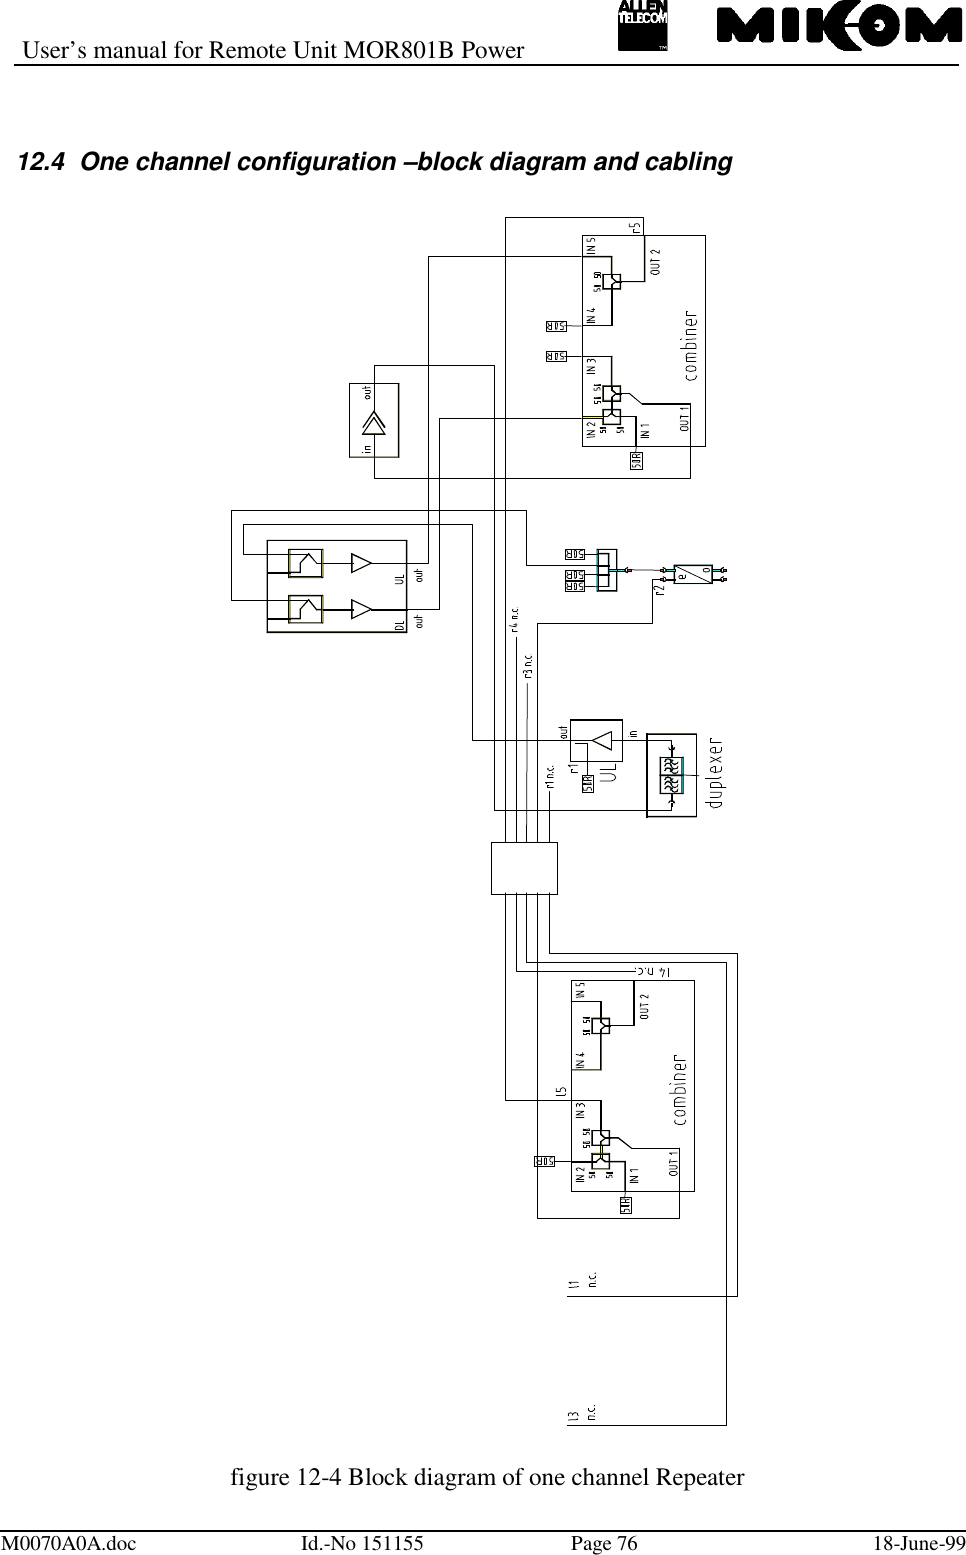 User’s manual for Remote Unit MOR801B PowerM0070A0A.doc Id.-No 151155 Page 76 18-June-9912.4  One channel configuration –block diagram and cablingfigure 12-4 Block diagram of one channel Repeater